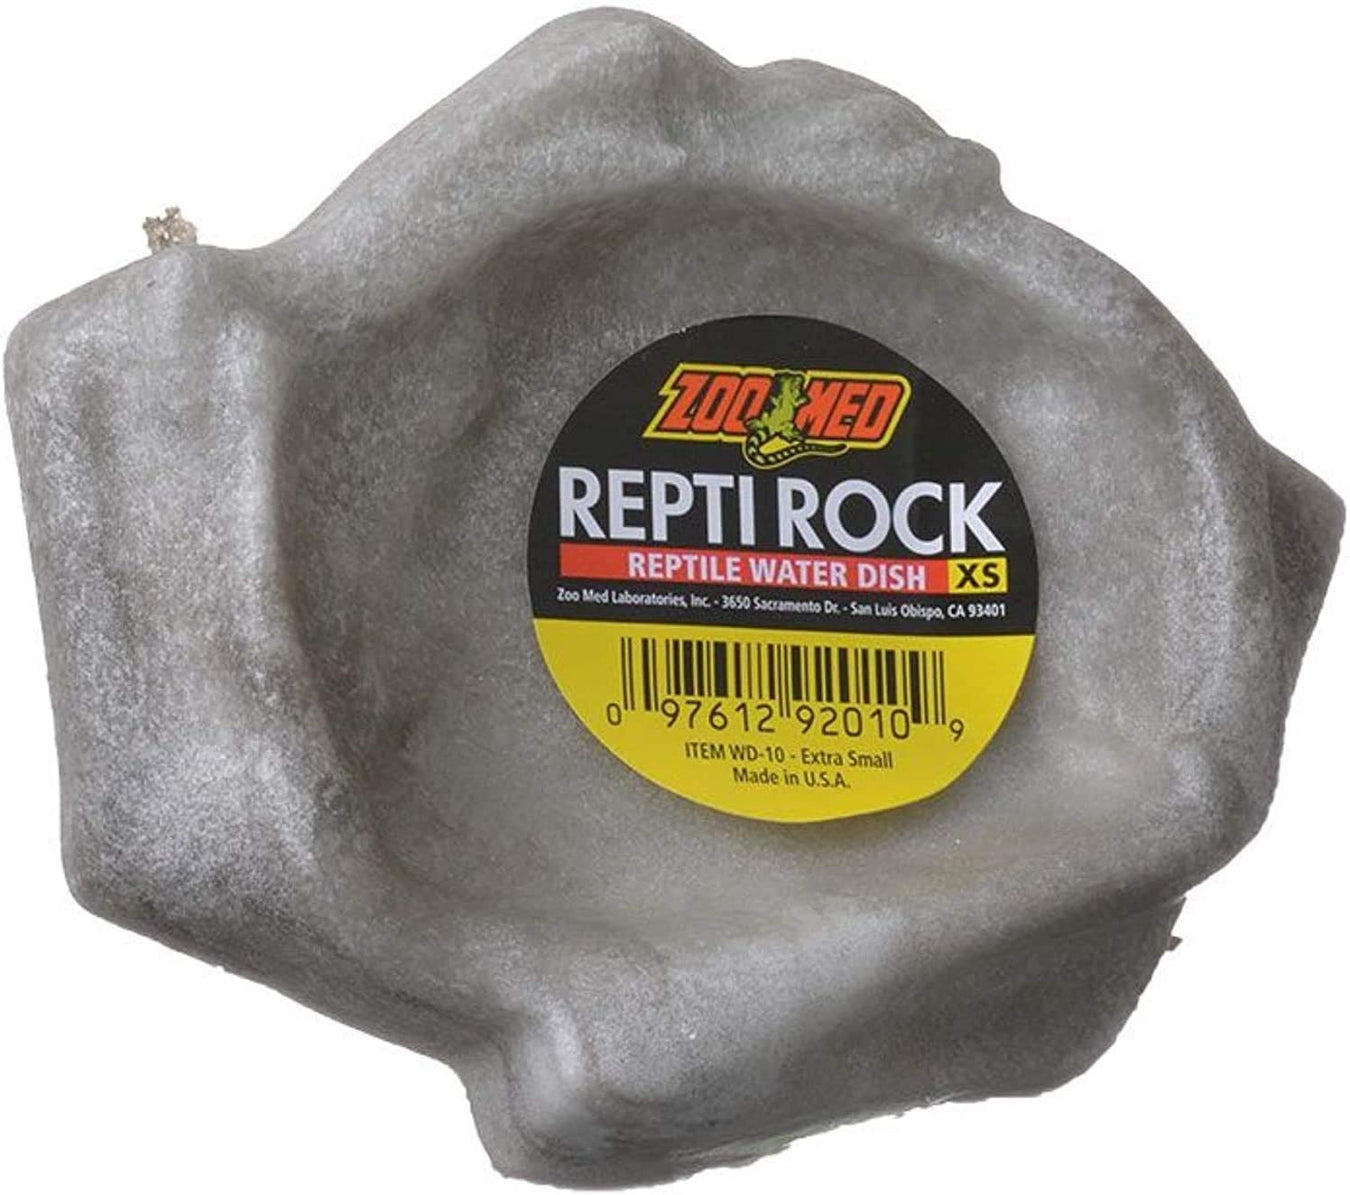 X-Small - 1 count Zoo Med Repti Rock Reptile Water Dish